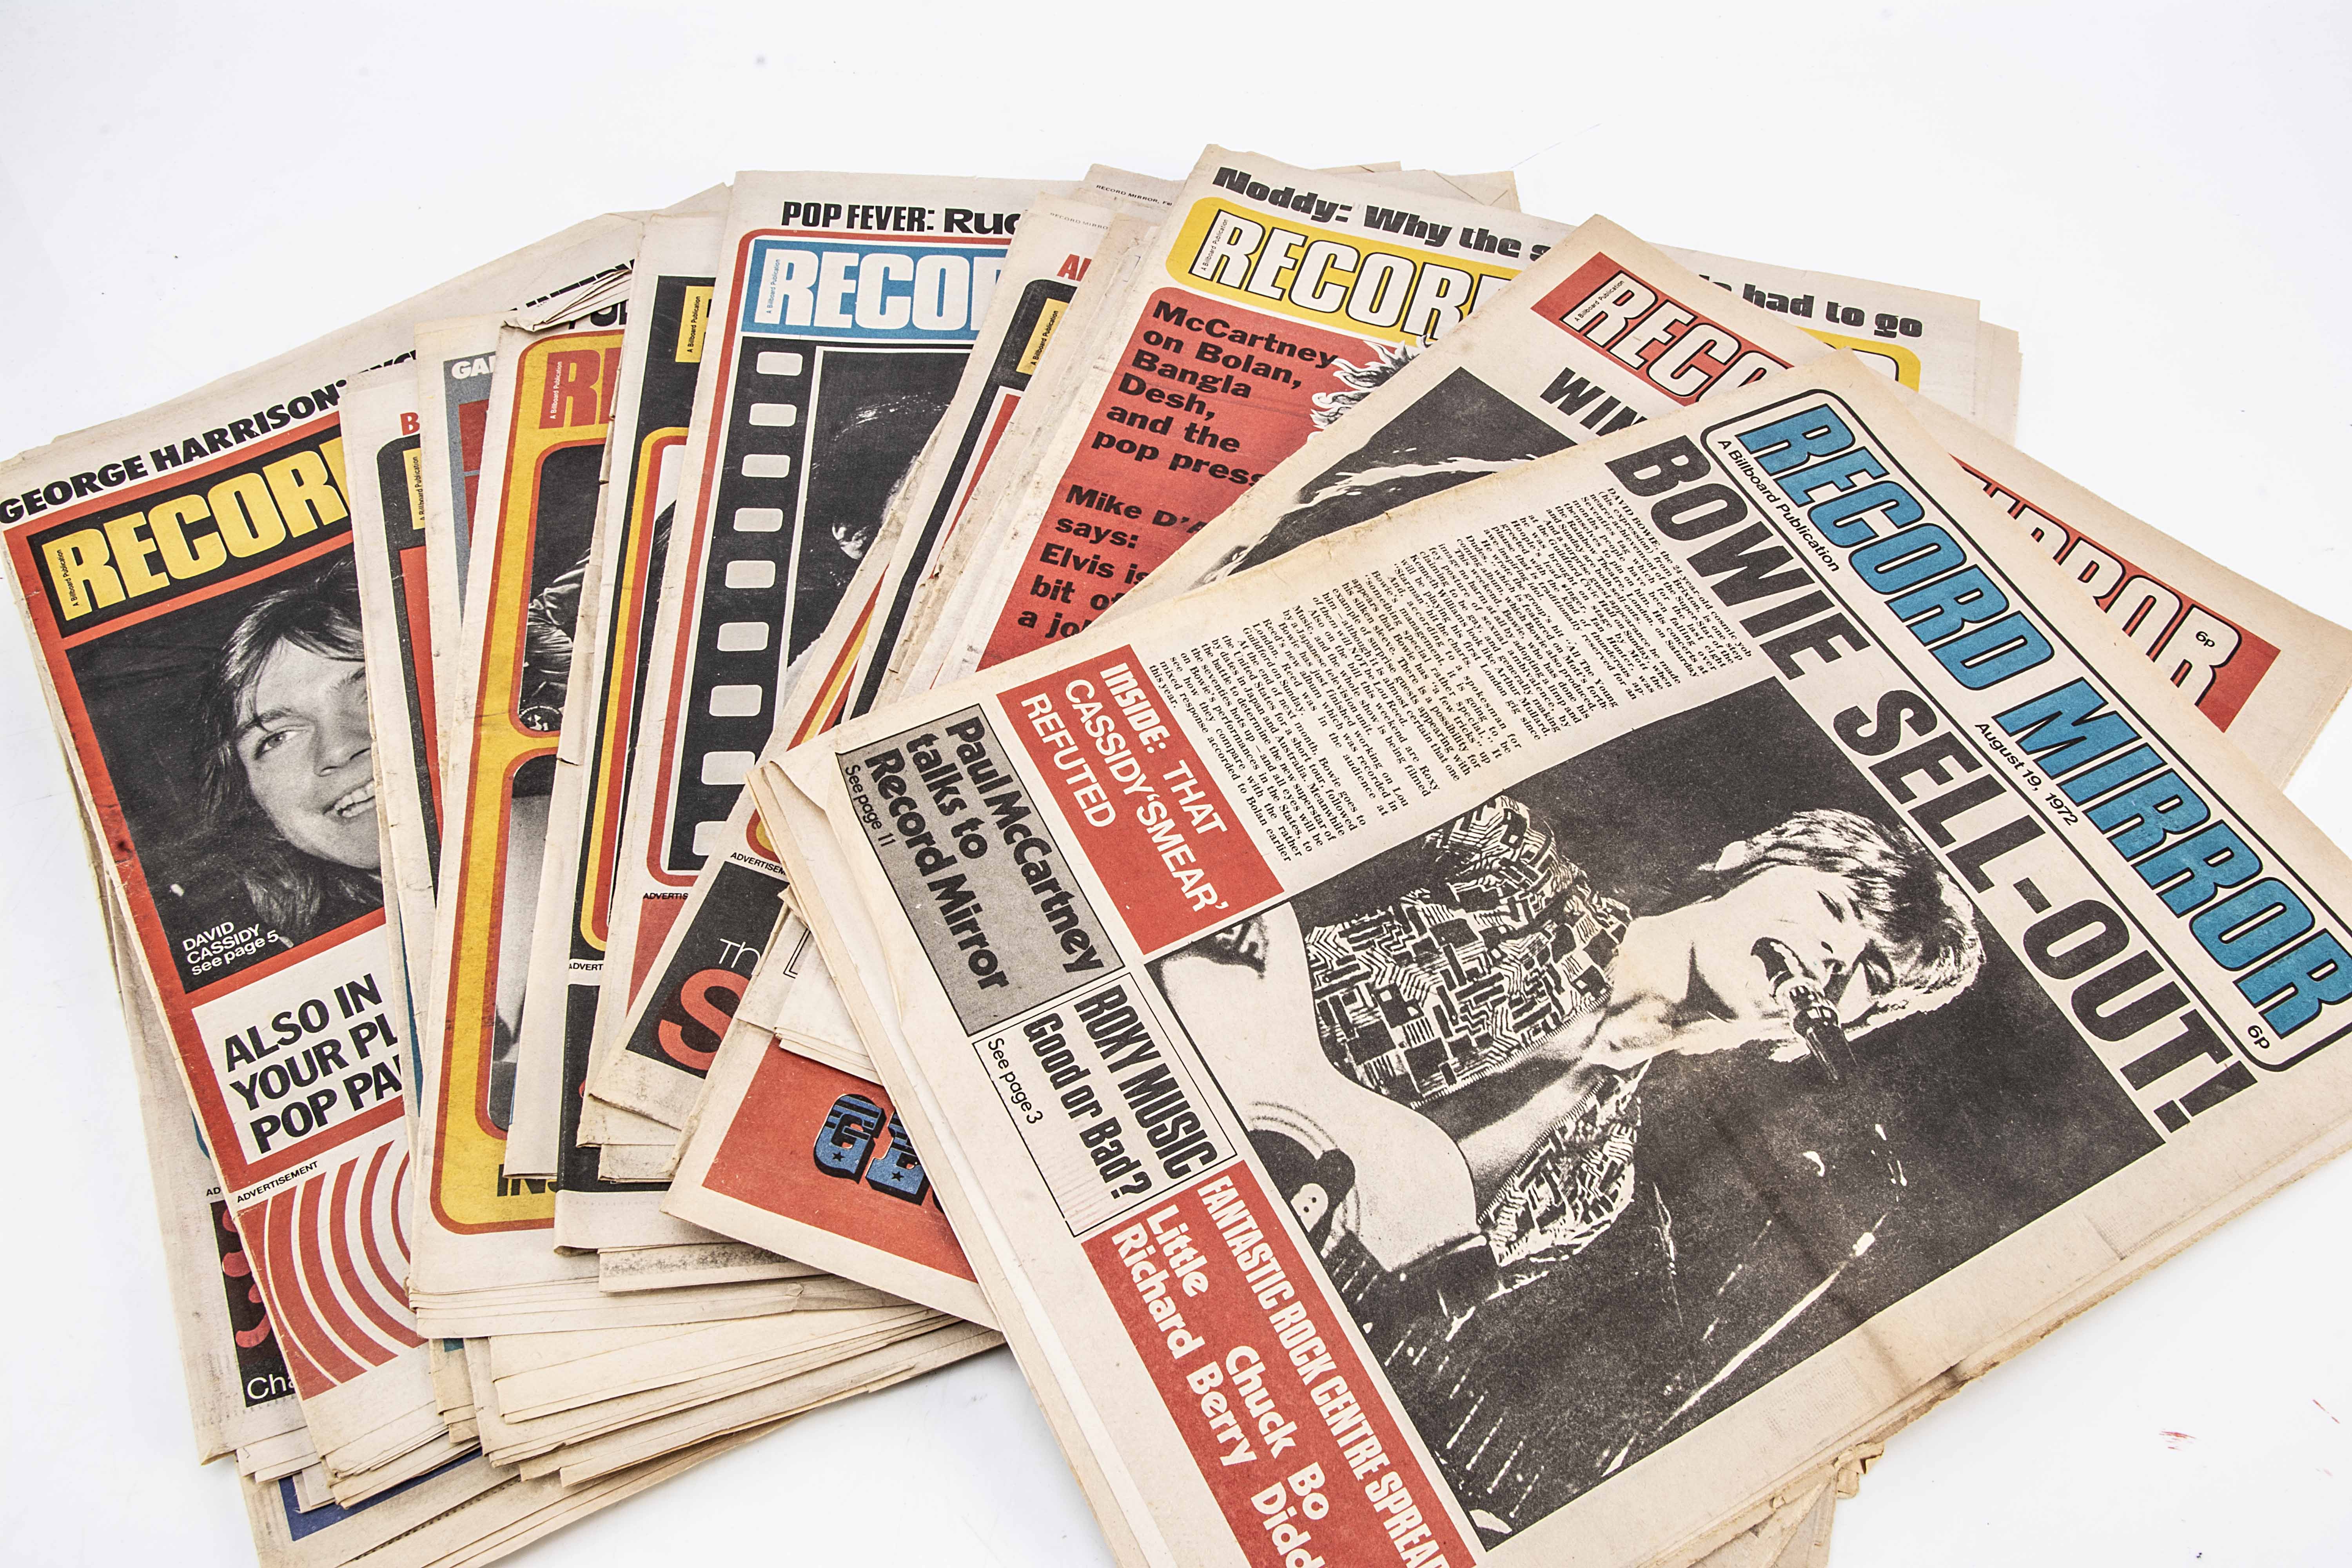 Record Mirror Magazines 1972, fifty three copies of Record Mirror from 1972 appears only the first